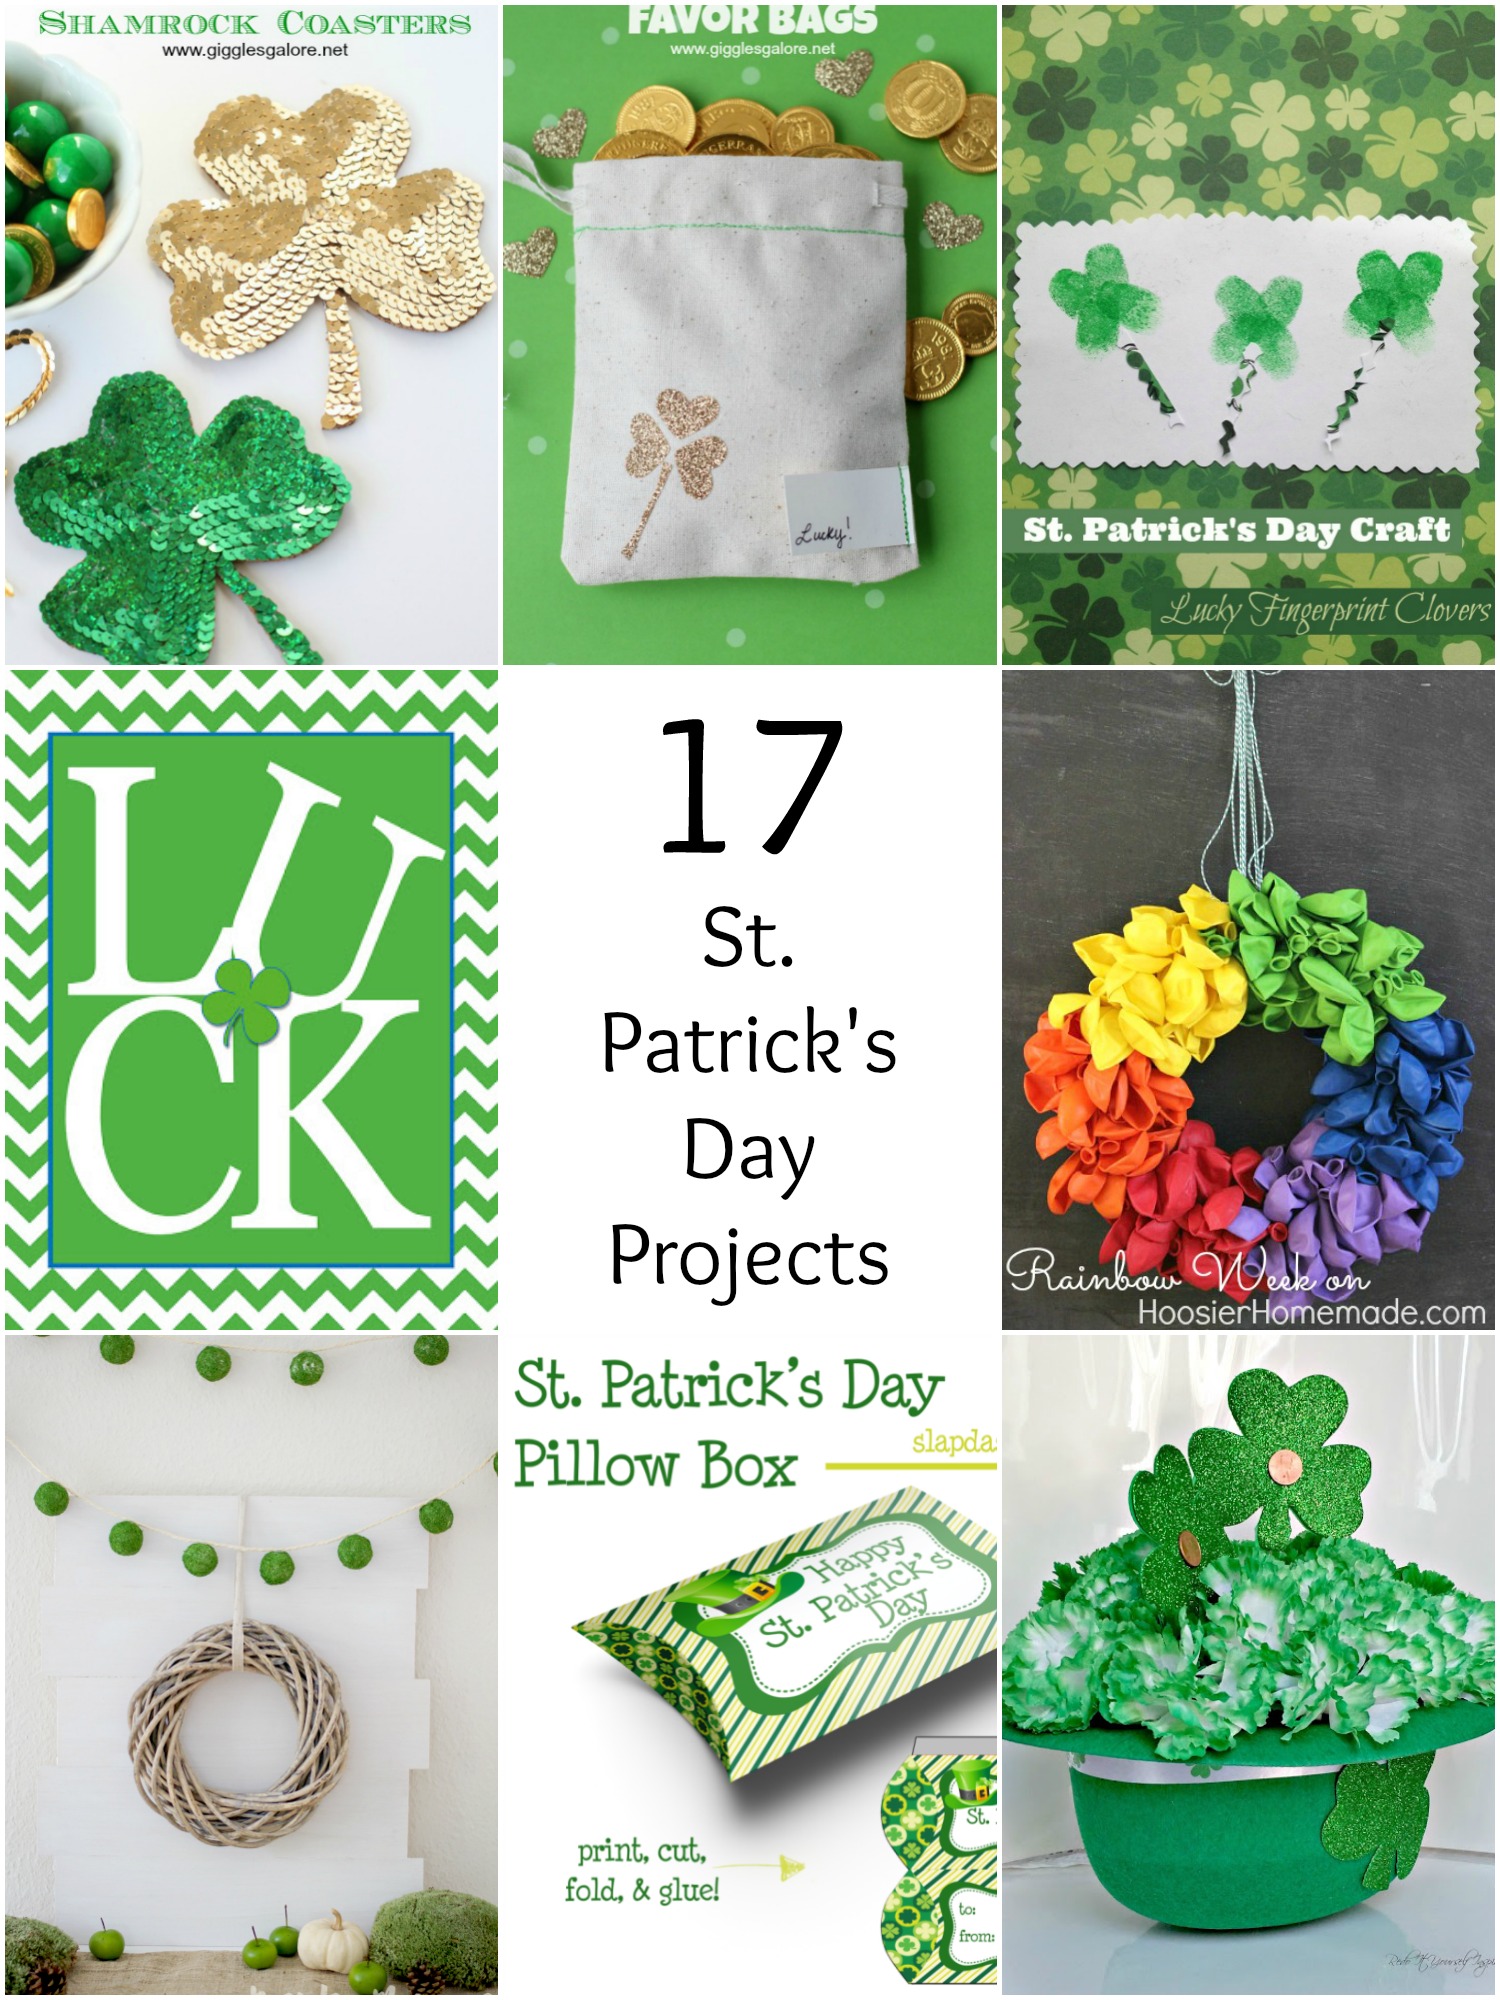 So Creative! - 17 Fun St. Patrick's Day Projects